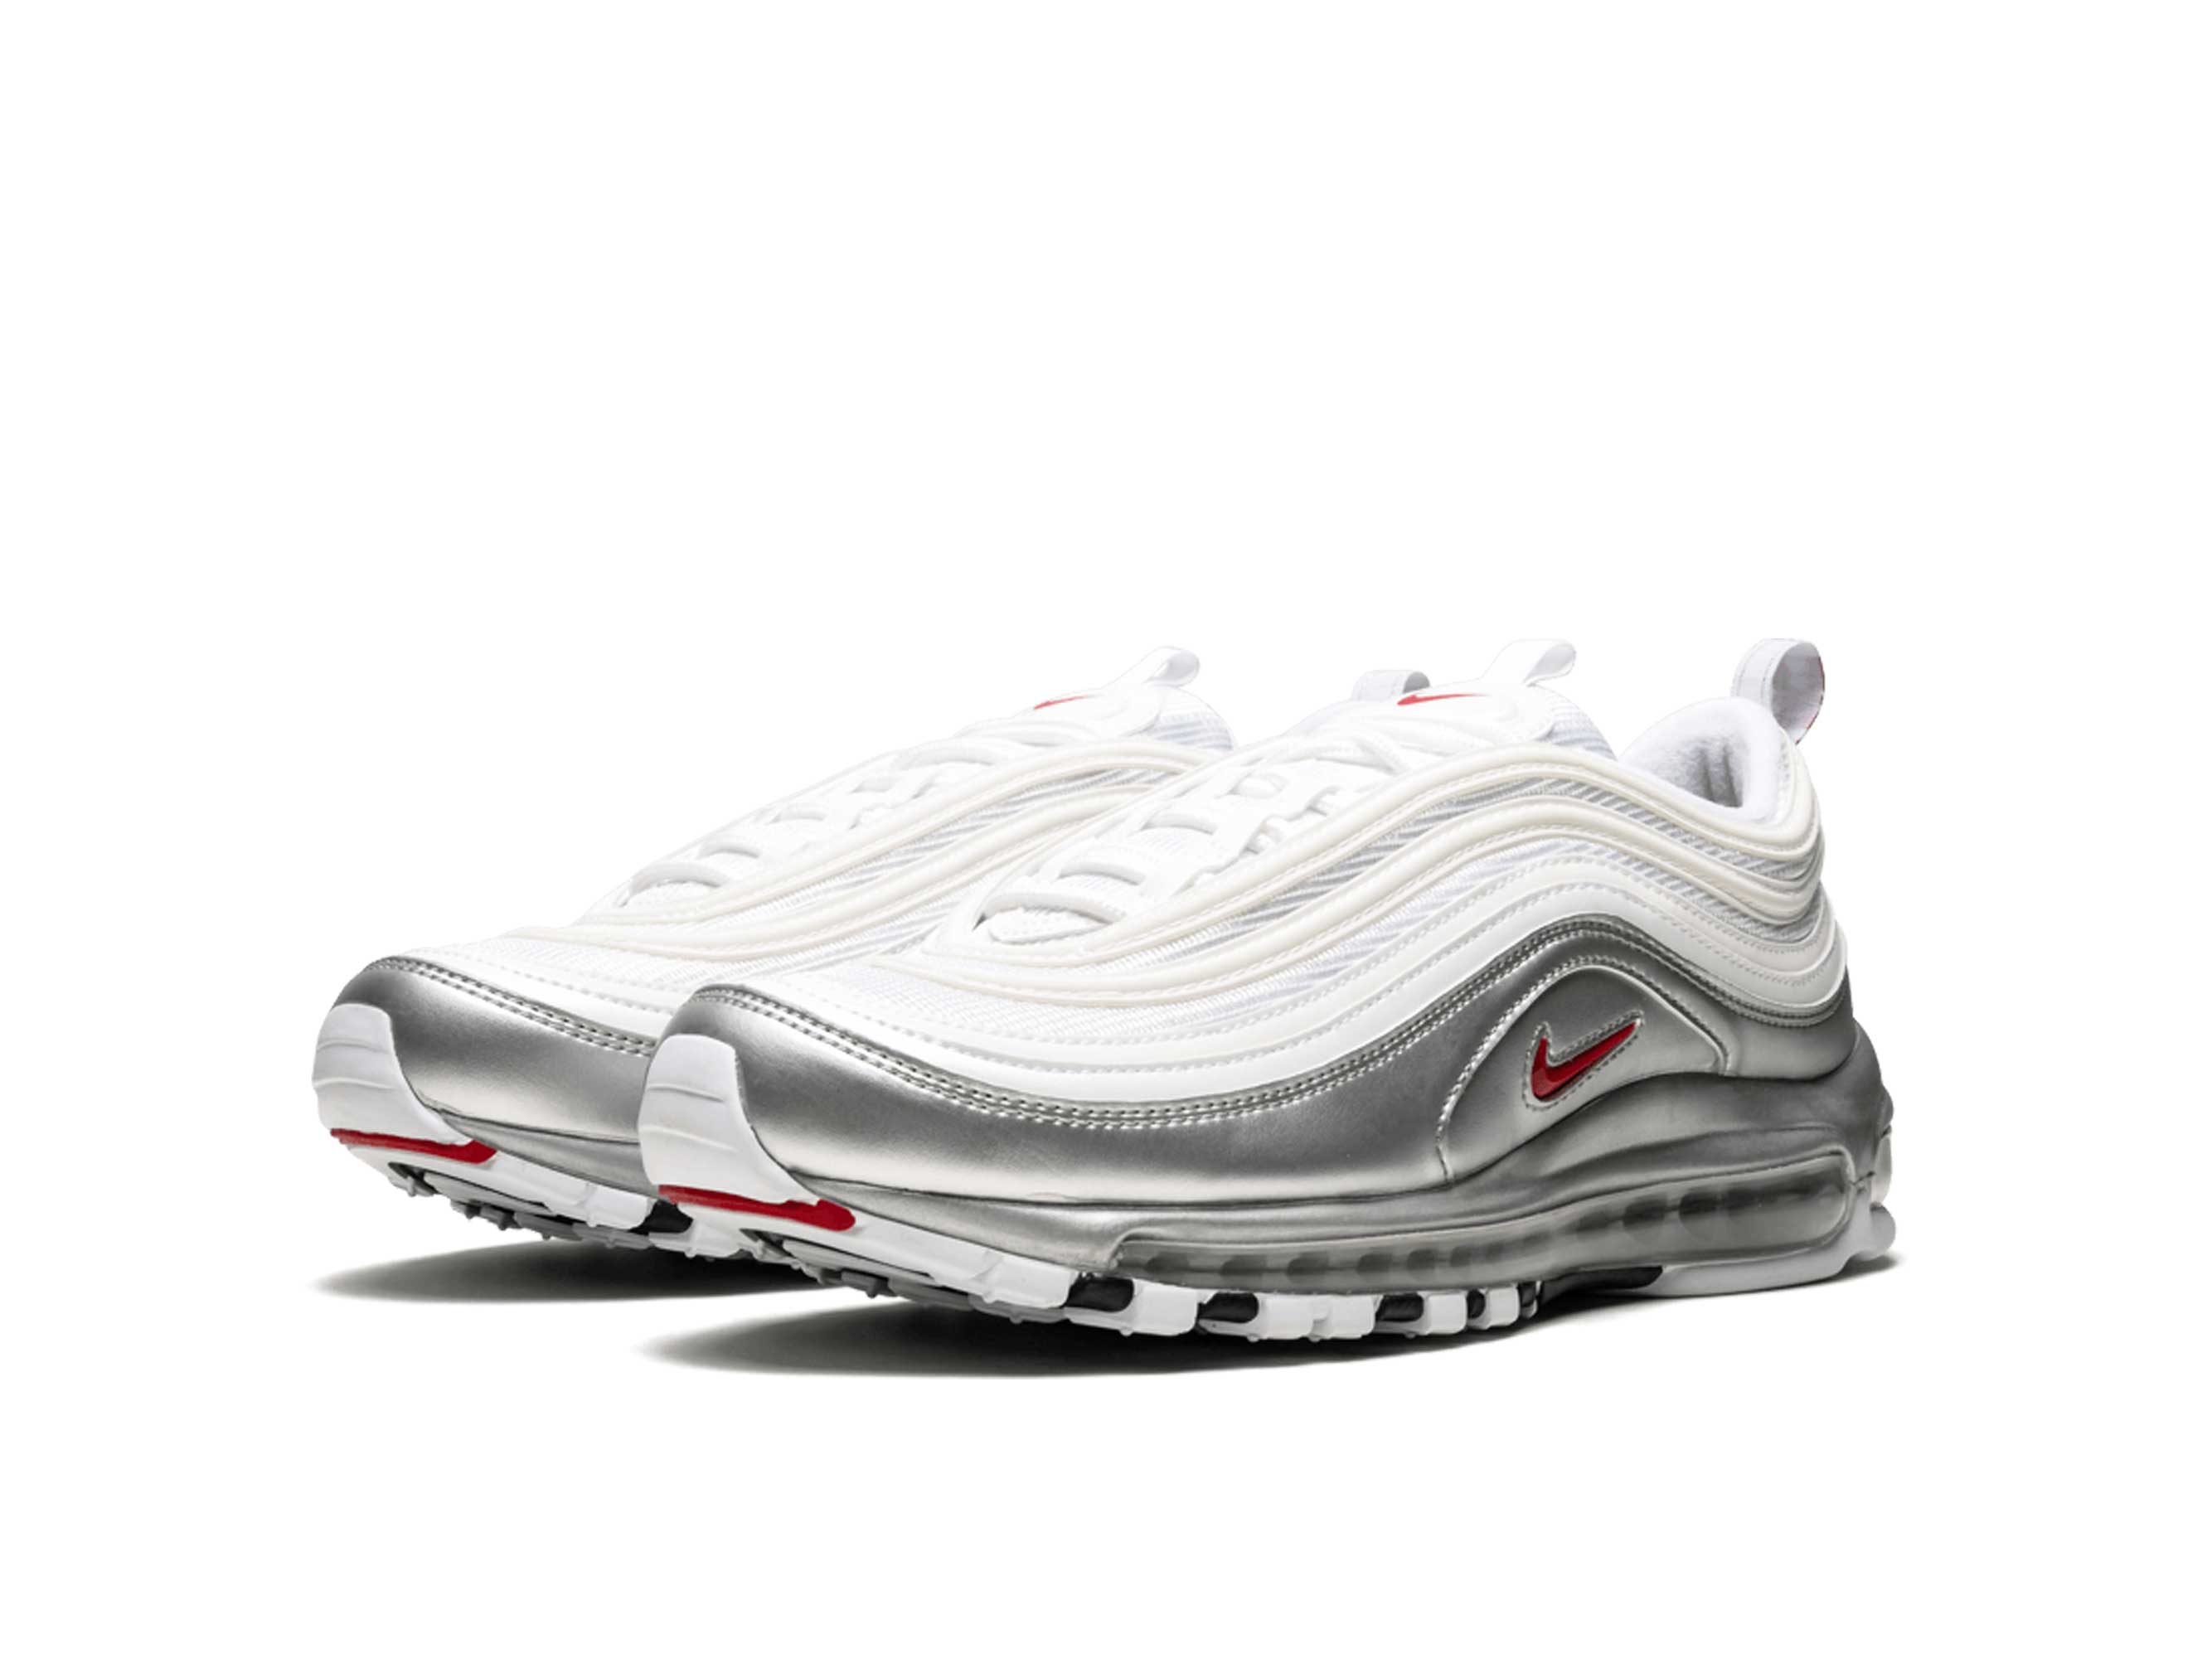 white and silver airmax